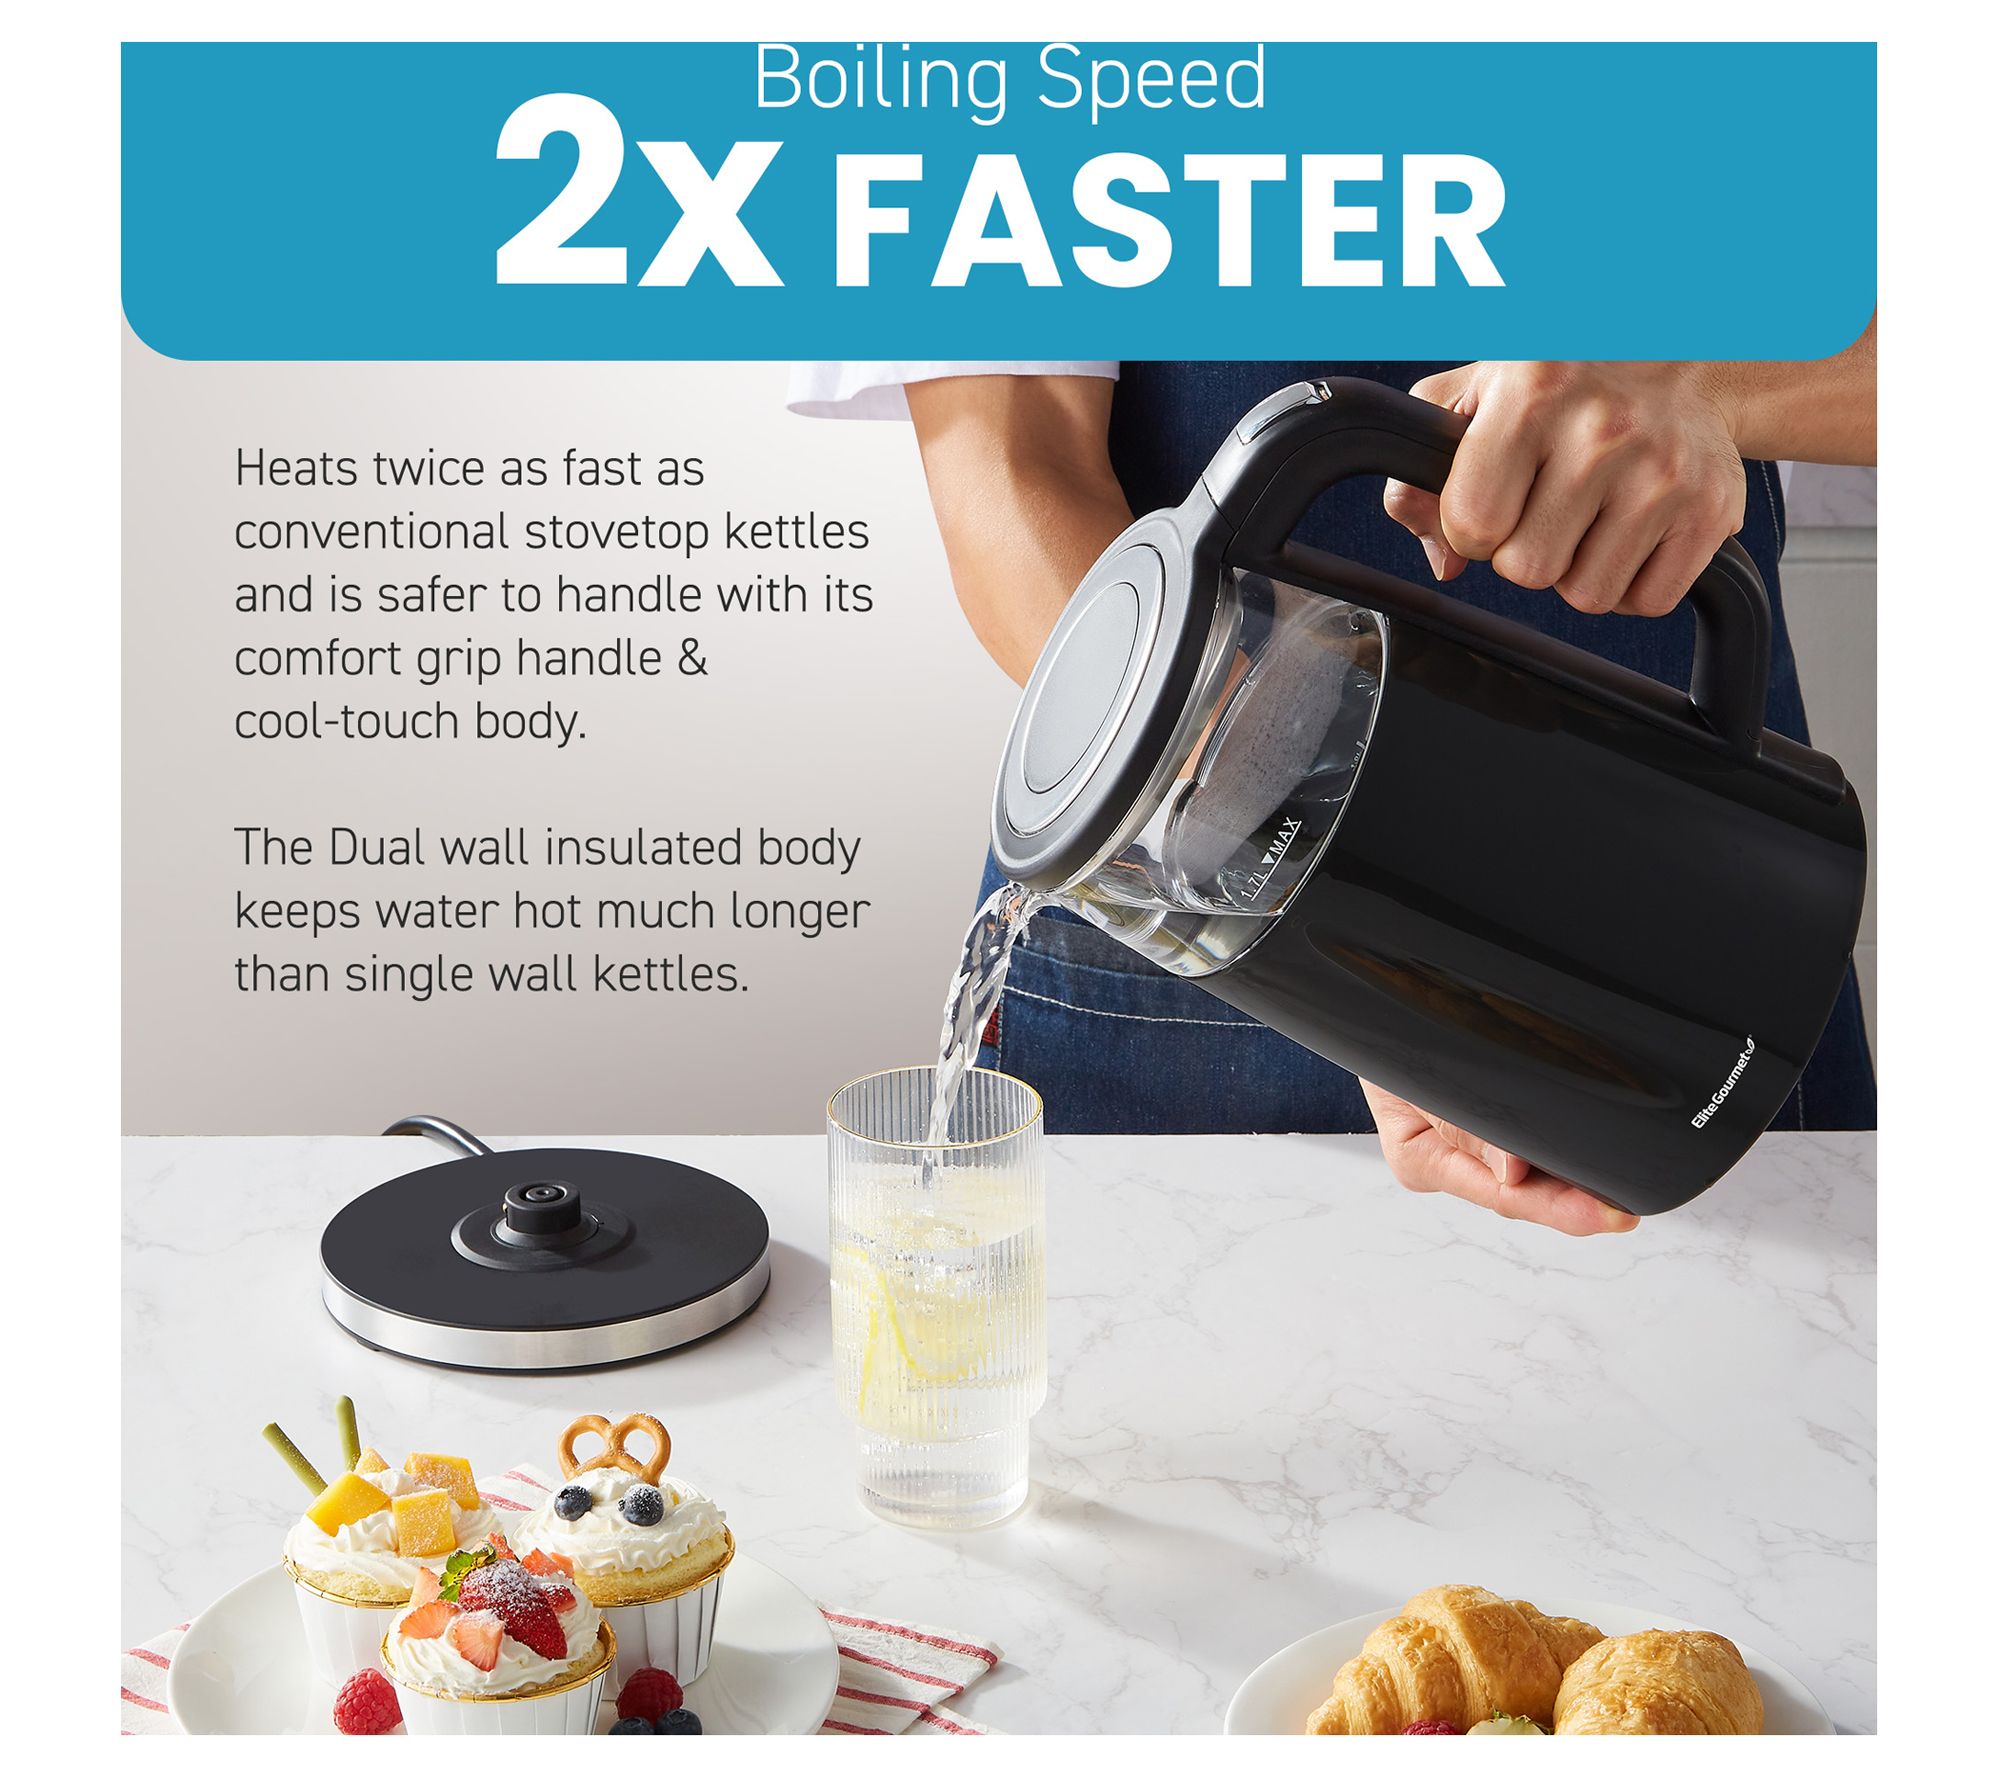 Cool touch Tea kettle - Offacy NEW